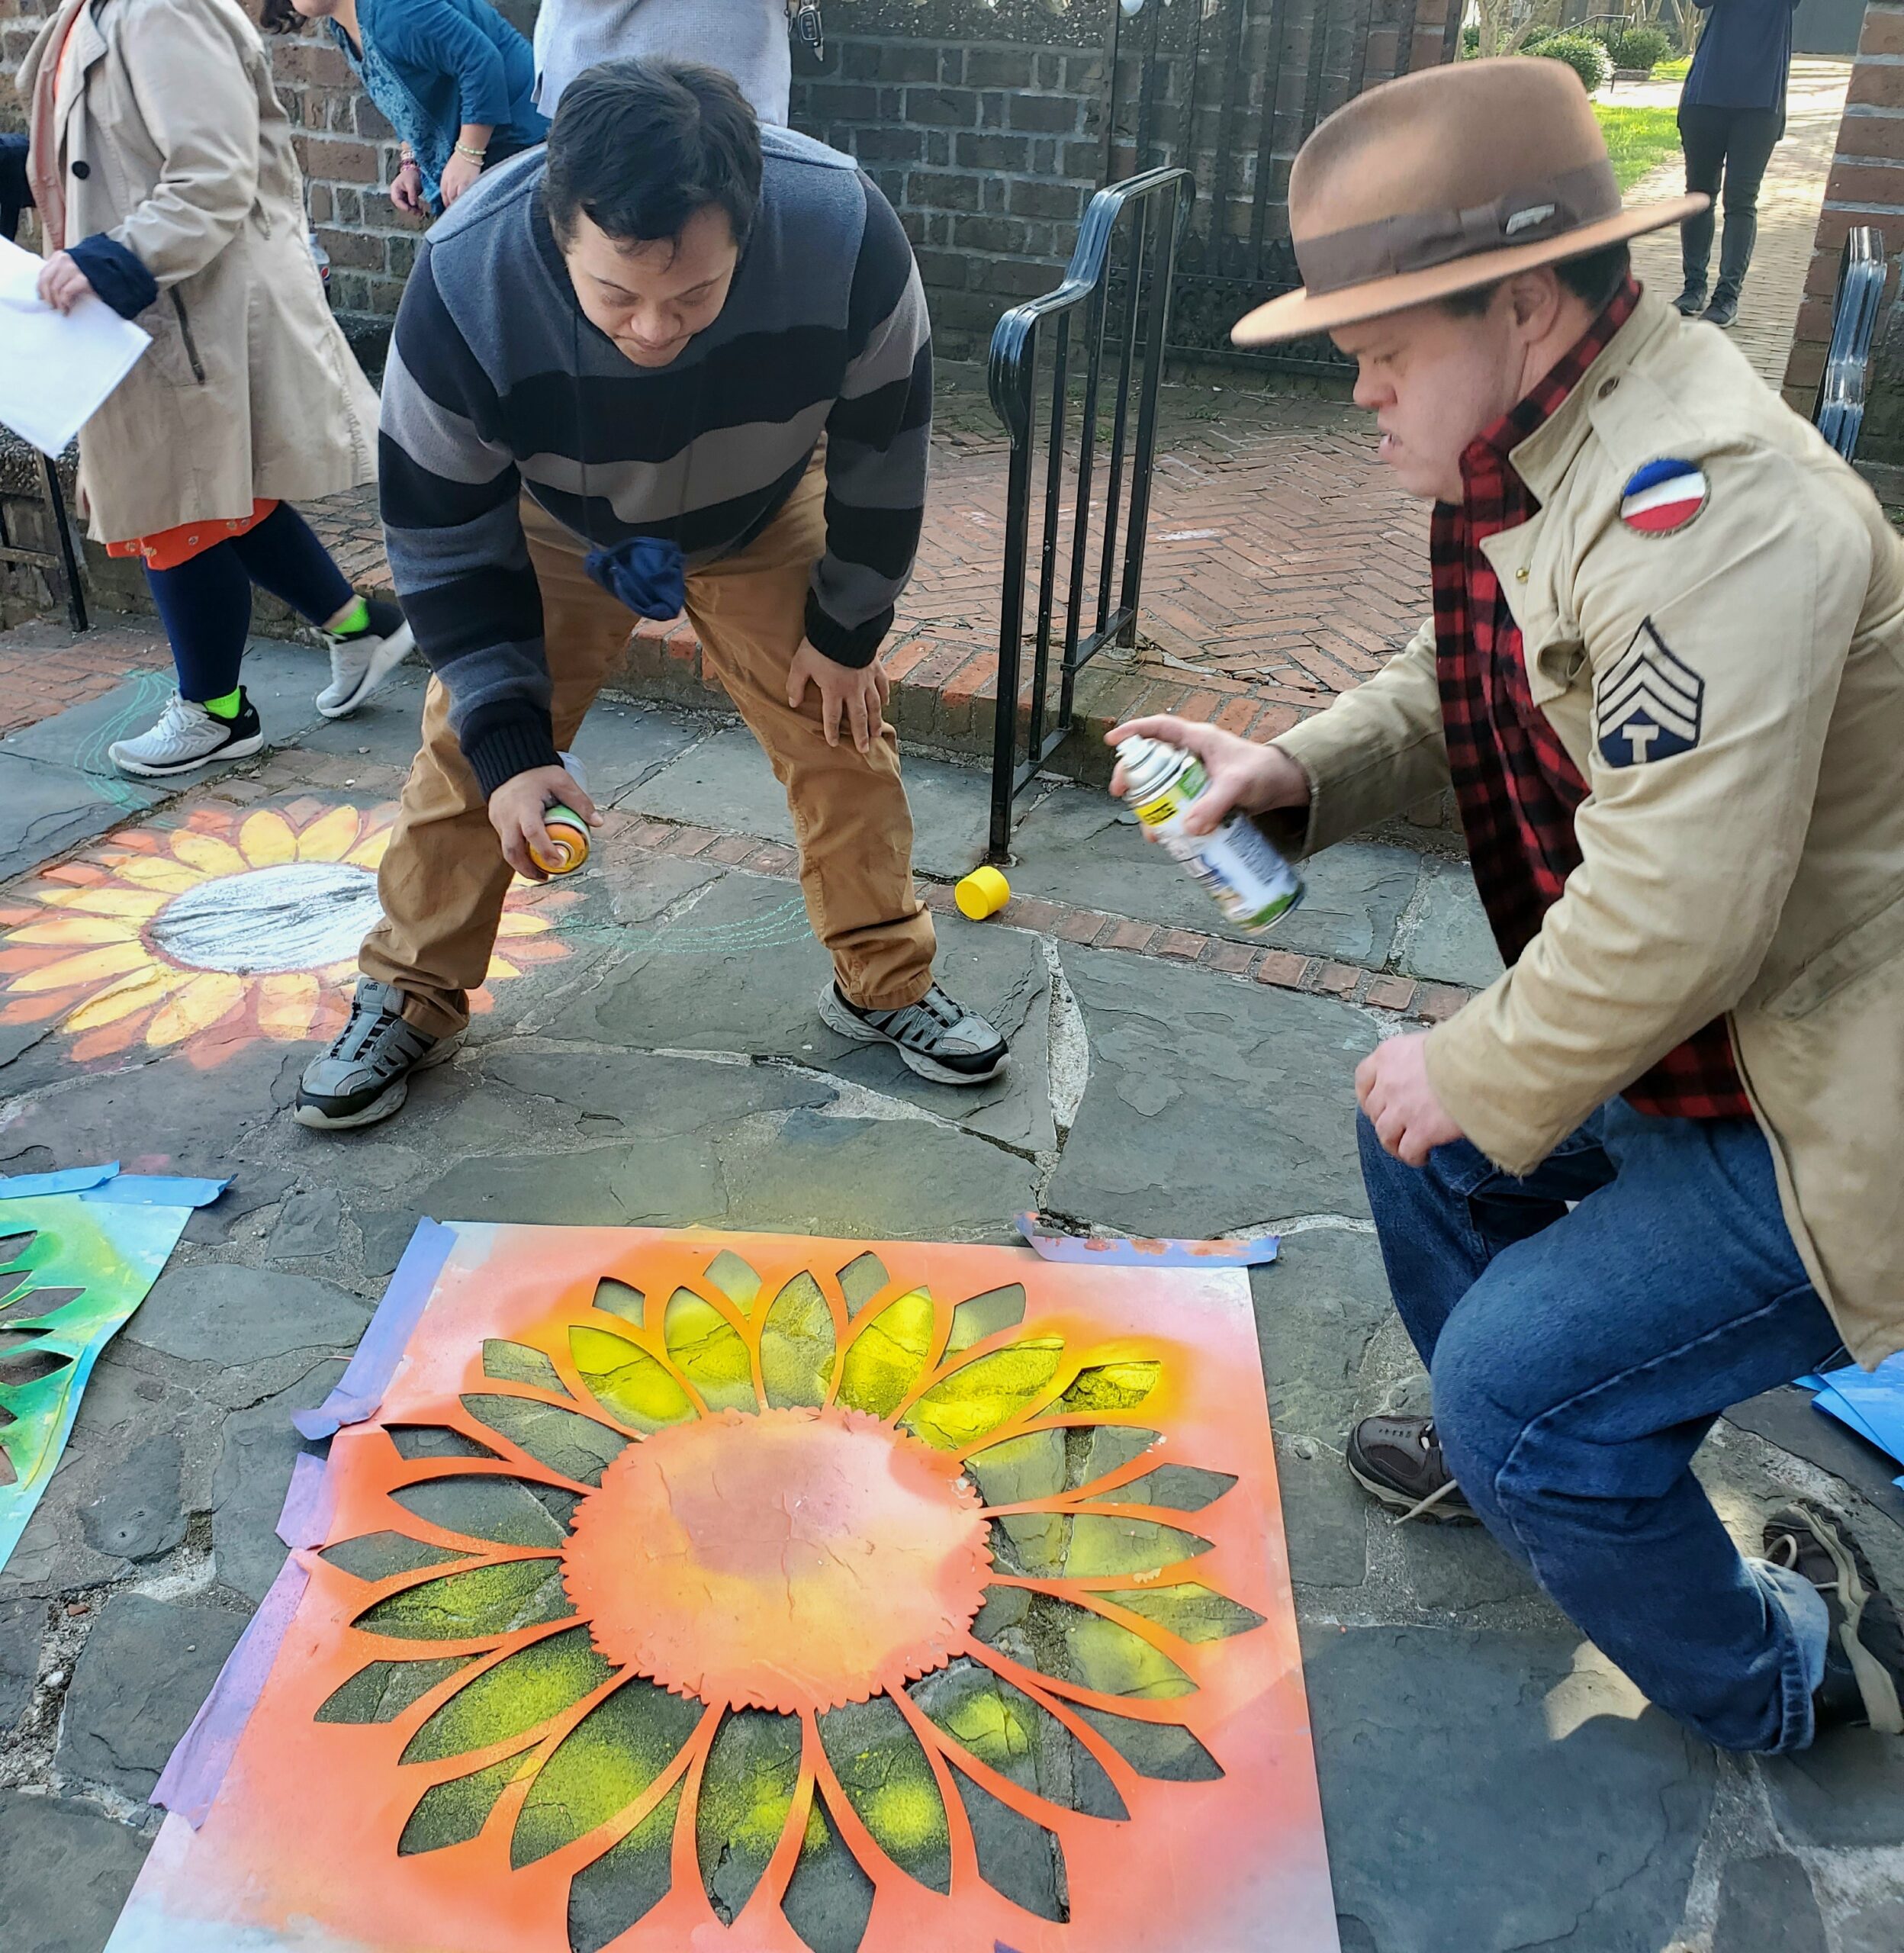 Members of the East End Special Players Explorers Program create art at the Southampton Arts Center. COURTESY EAST END SPECIAL PLAYERS